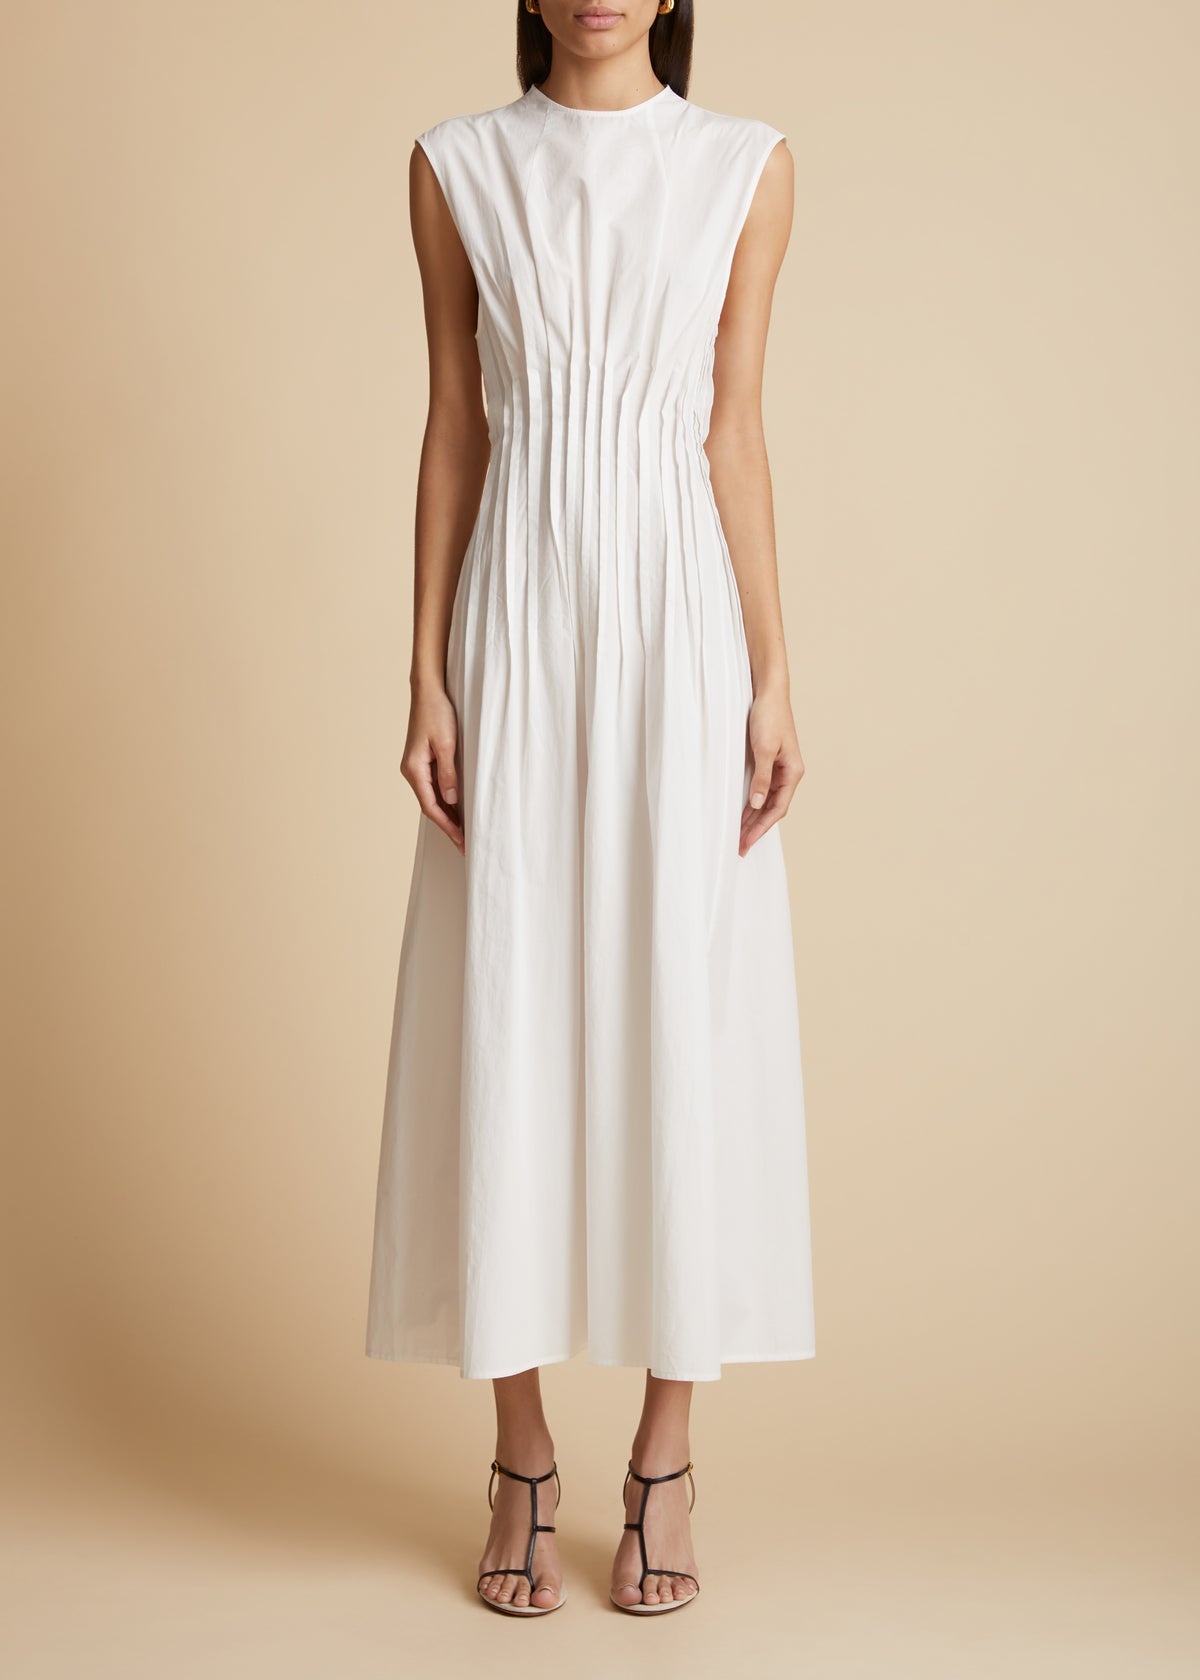 The Wes Dress in White - 2